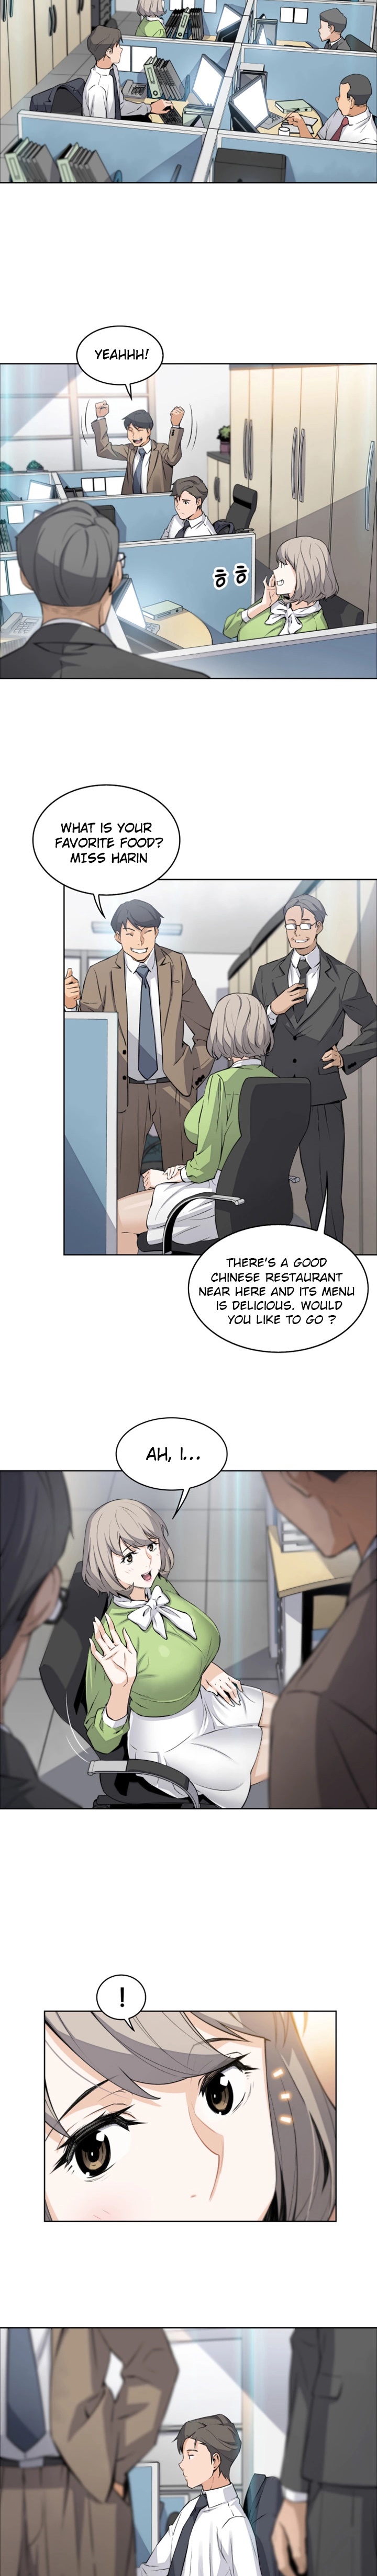 Housekeeper Manhwa - Chapter 14 Page 9